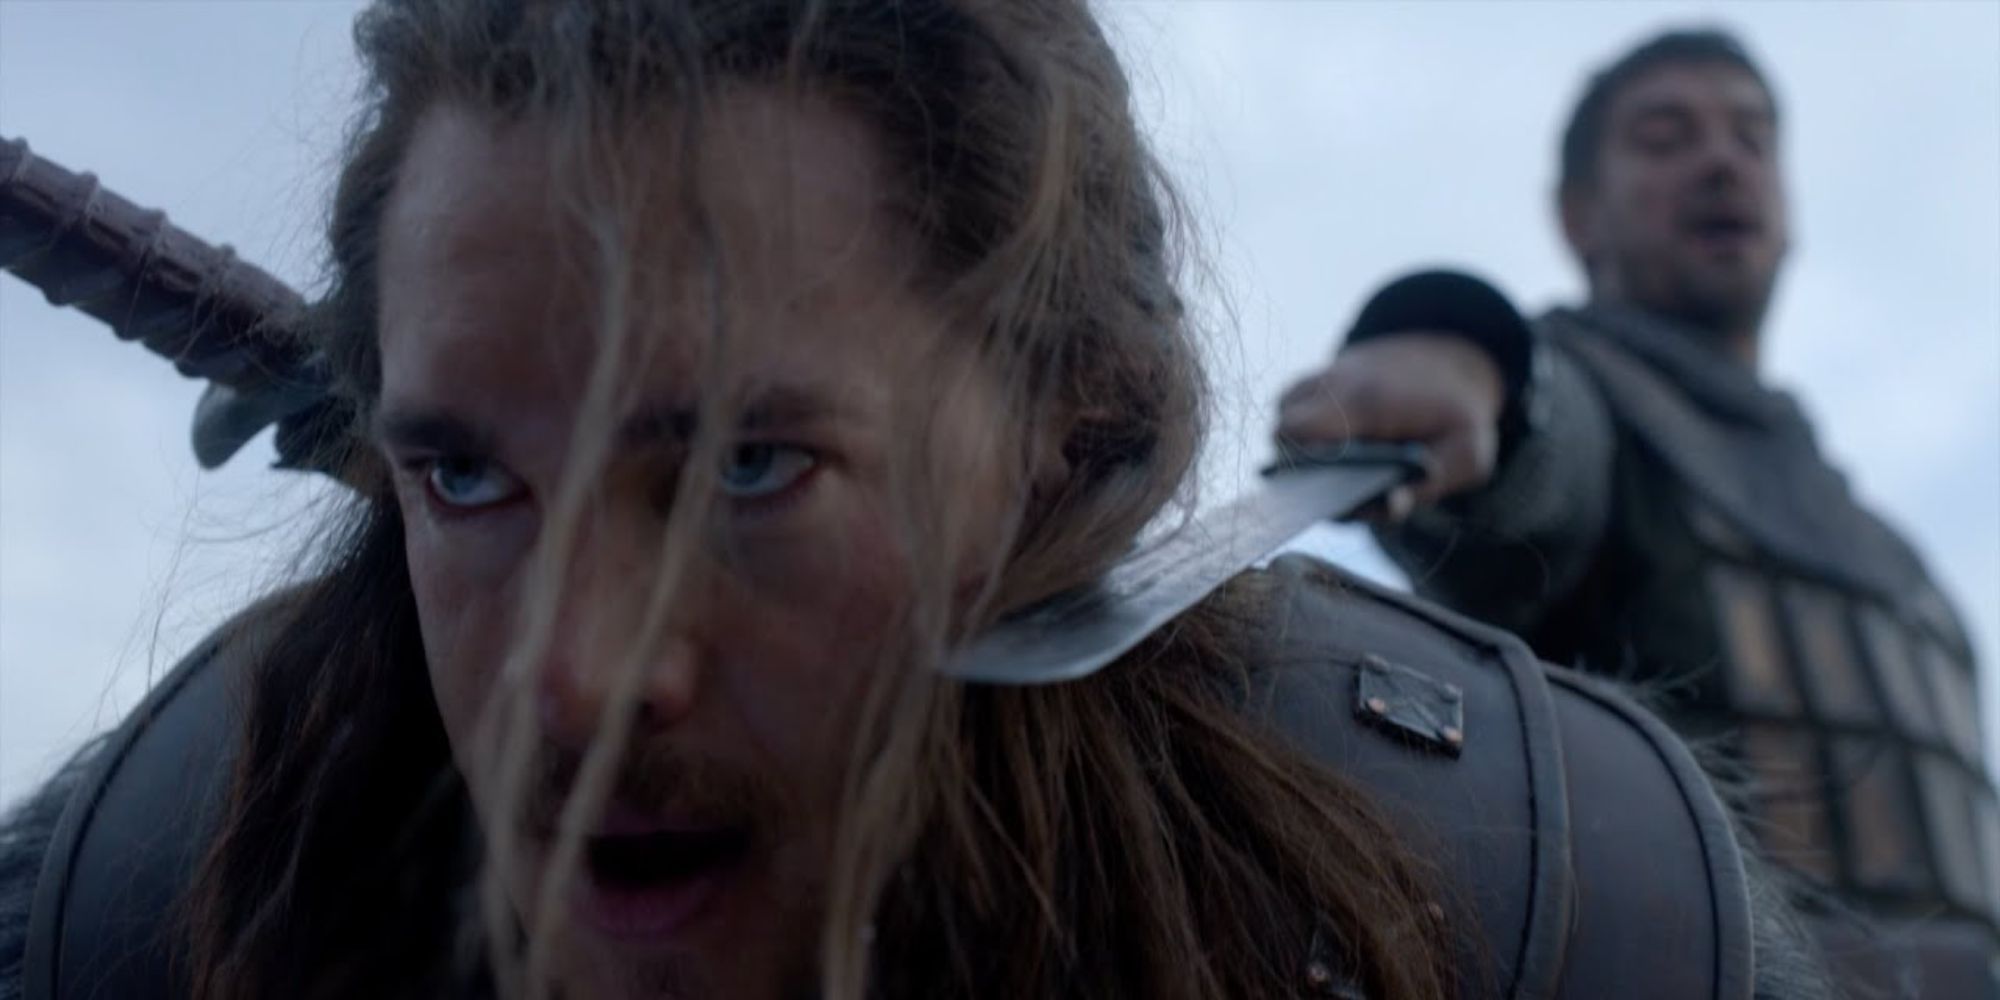 Leofric holds a sword to Uhtred's neck